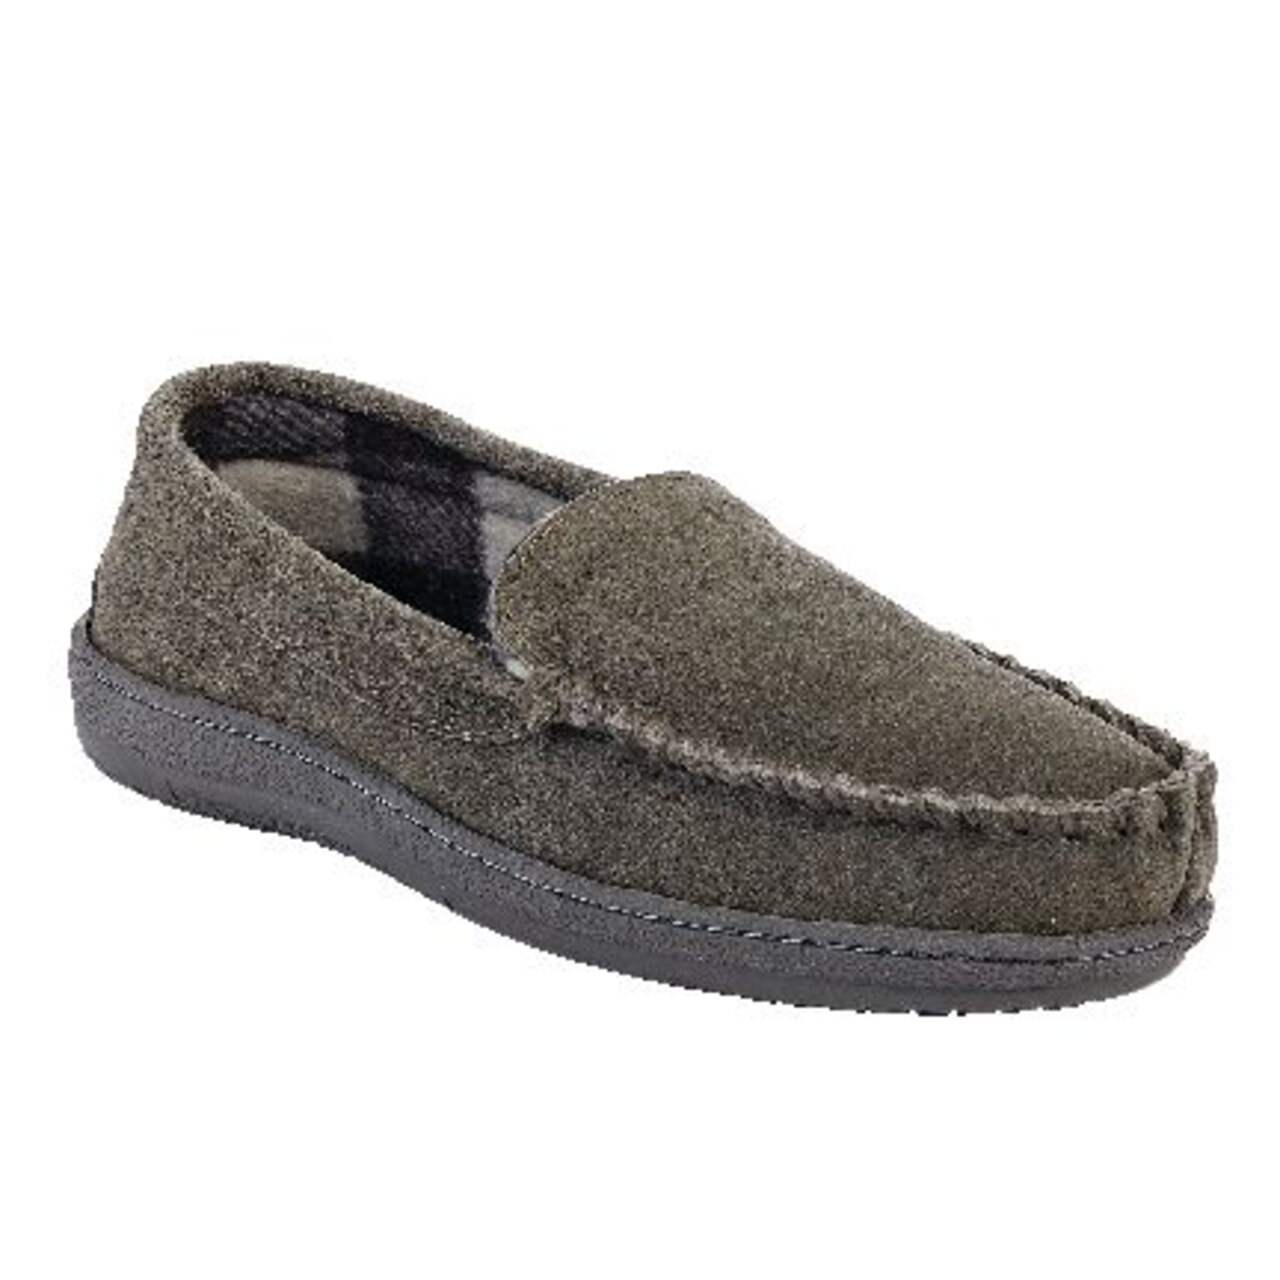 Outbound Women's Soft Fleece Lined Knit Indoor House Sock Slippers